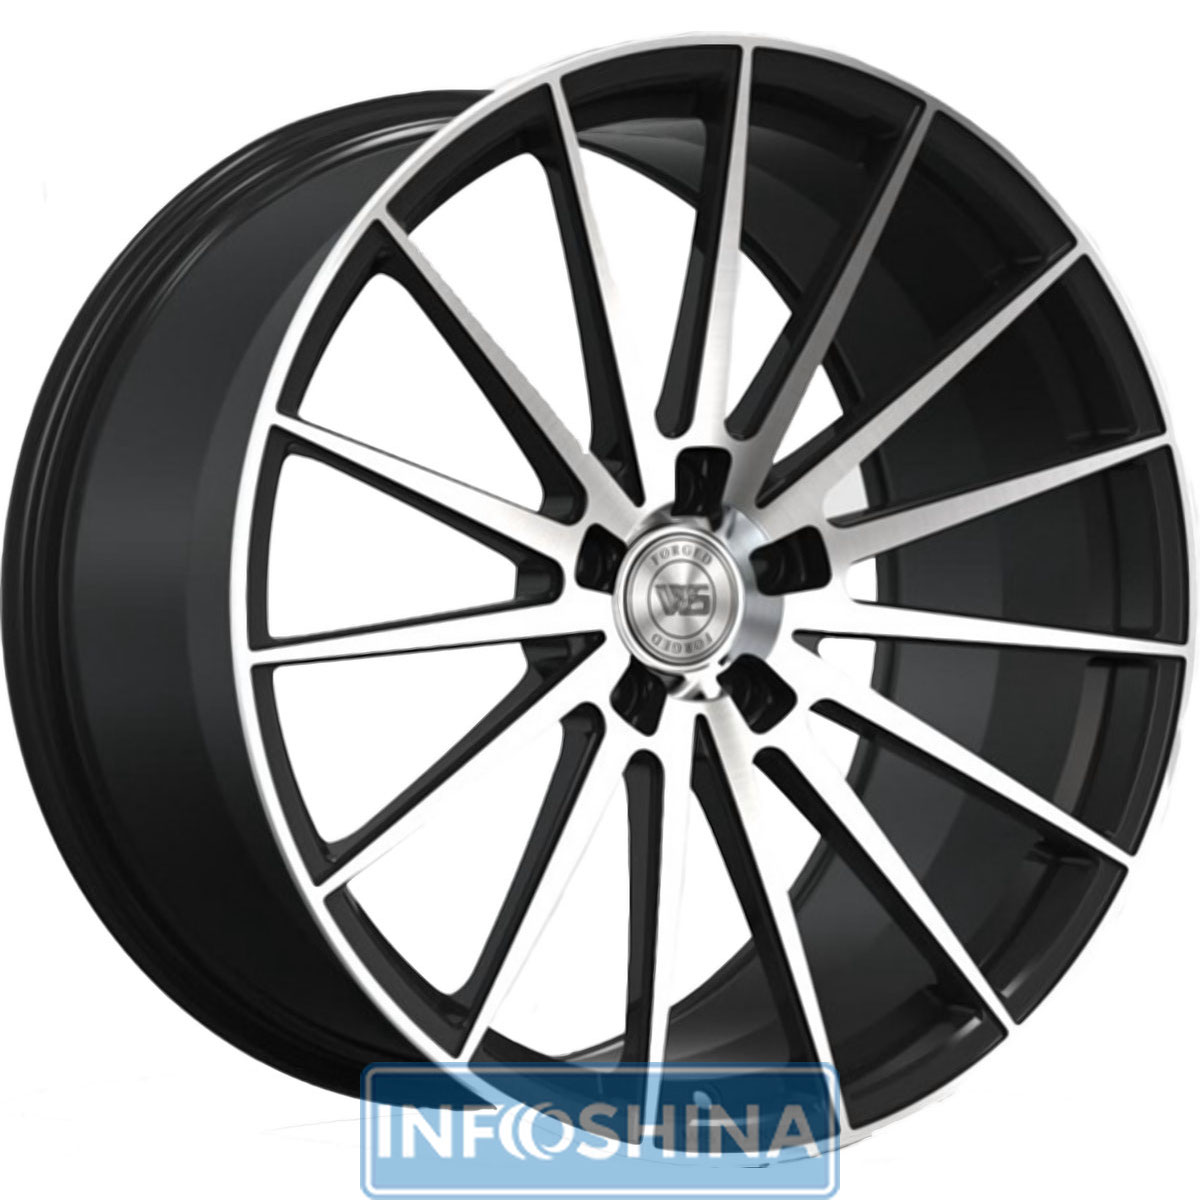 Купить диски WS Forged WS2116 Satin Black With Machined Face R20 W10 PCD5x112 ET35 DIA66.6